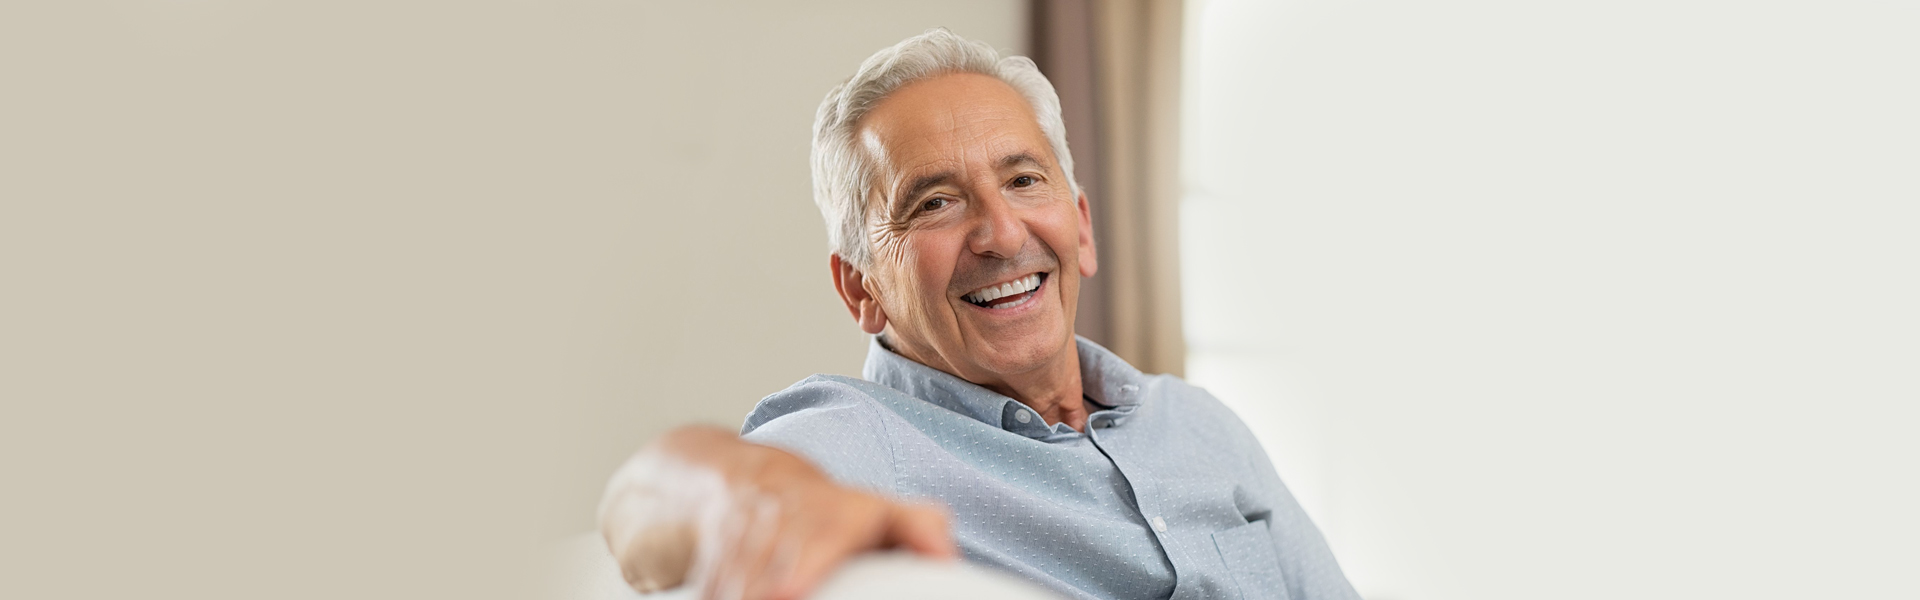 What Are The Three Types of Dental Implants?